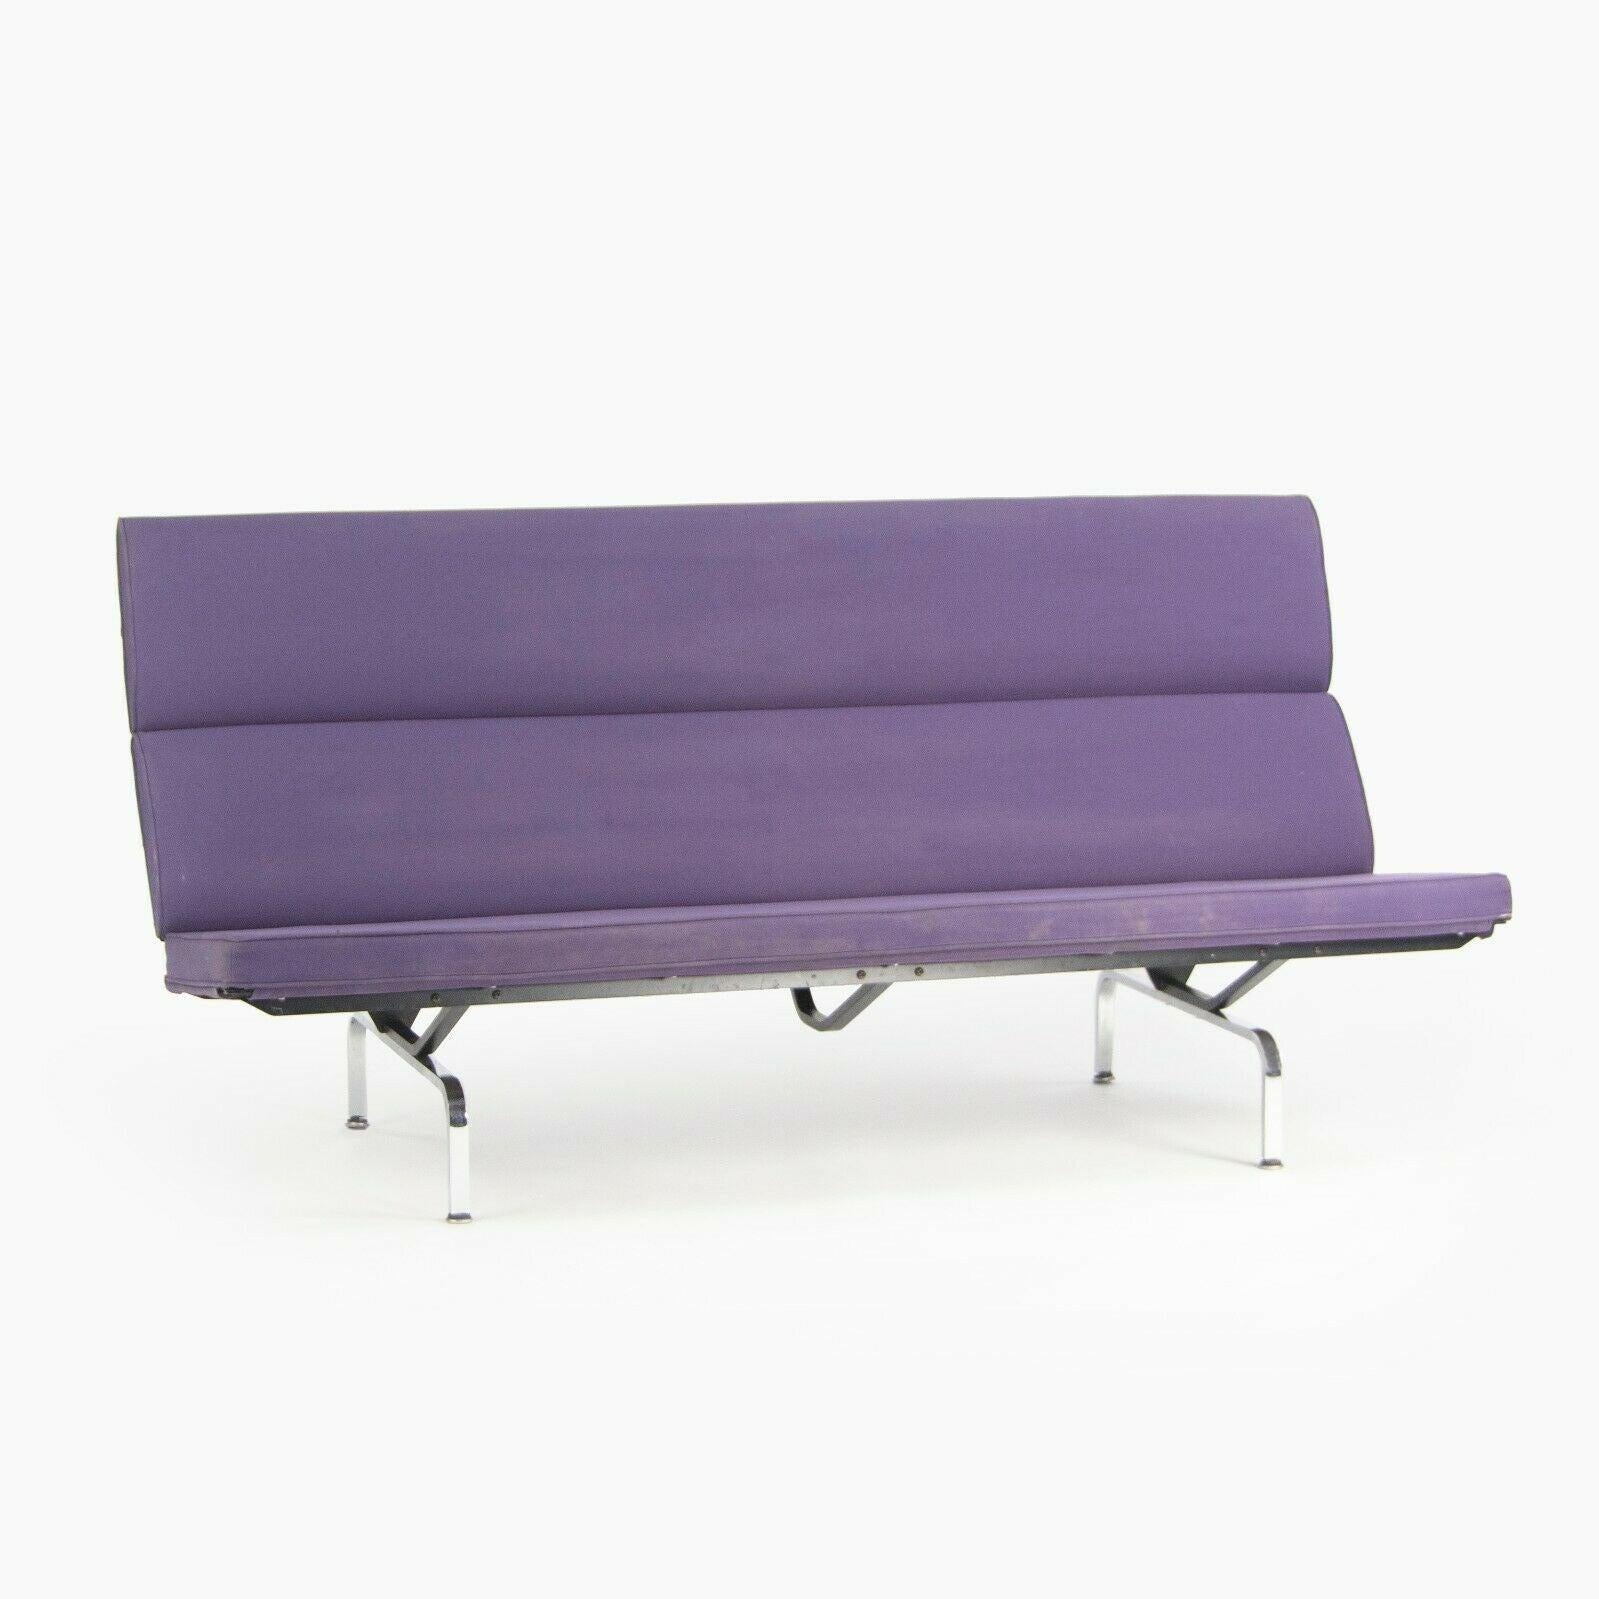 Listed for sale is an original Herman Miller Eames Sofa Compact designed by Ray and Charles Eames. The sofa compact was designed to be as efficient as possible when shipping and was therefore designed to fold almost flat. This example is in